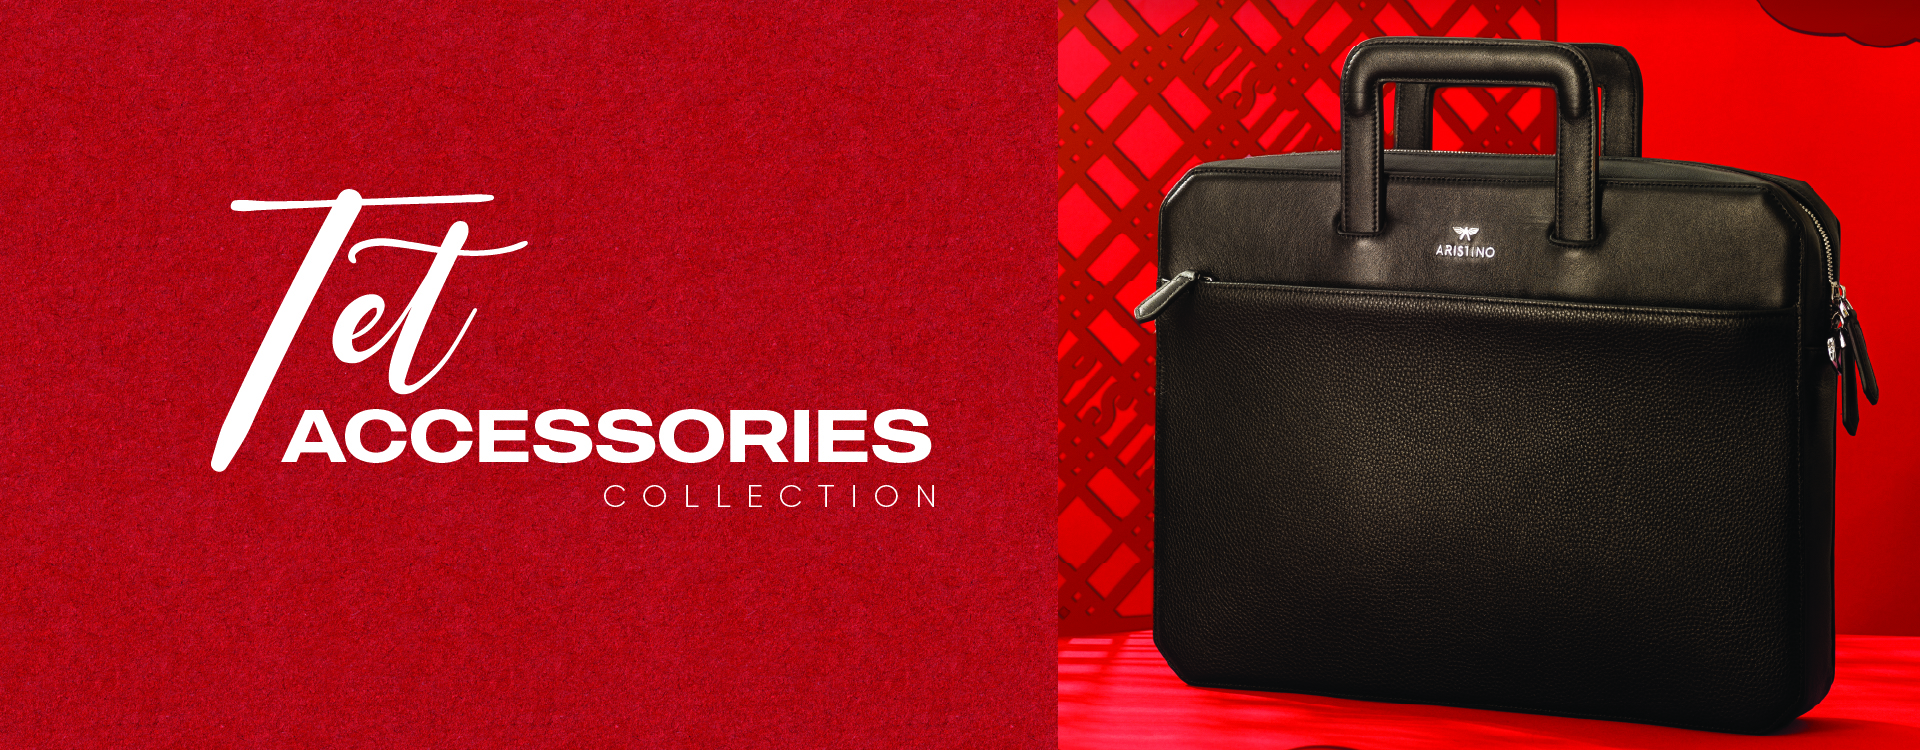 Tet Accessories Collection